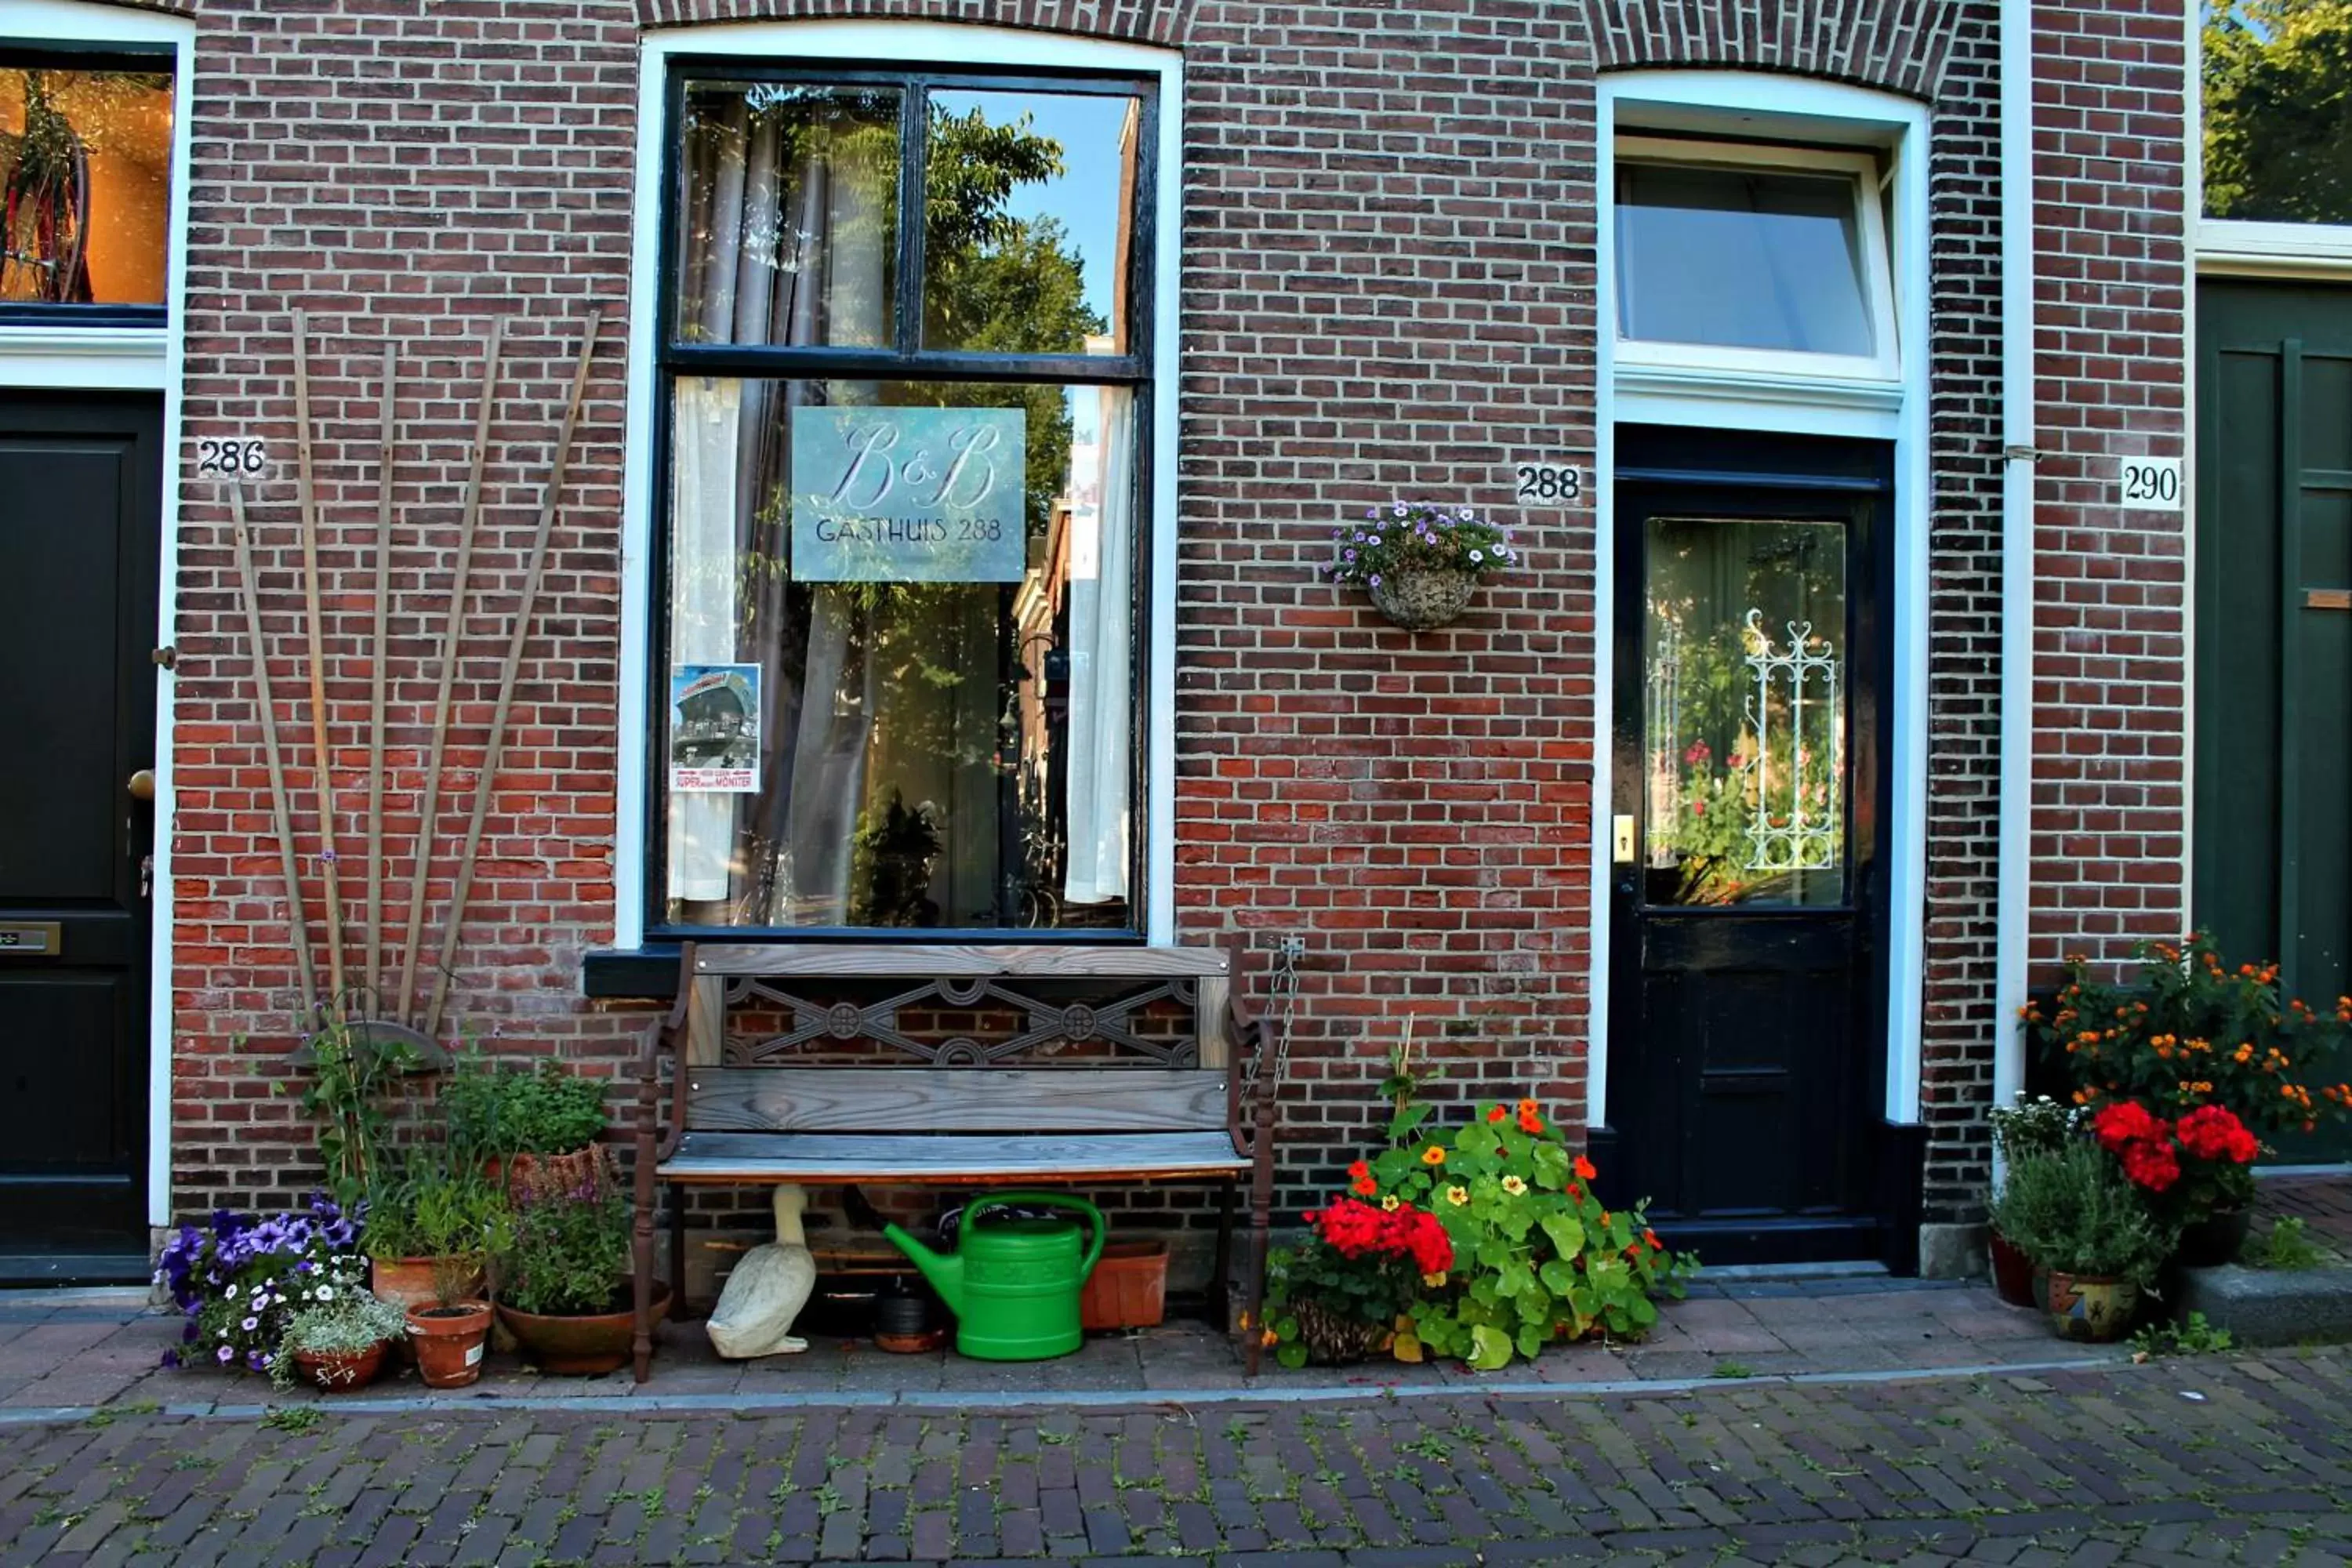 Property building in B&B Gasthuis 288